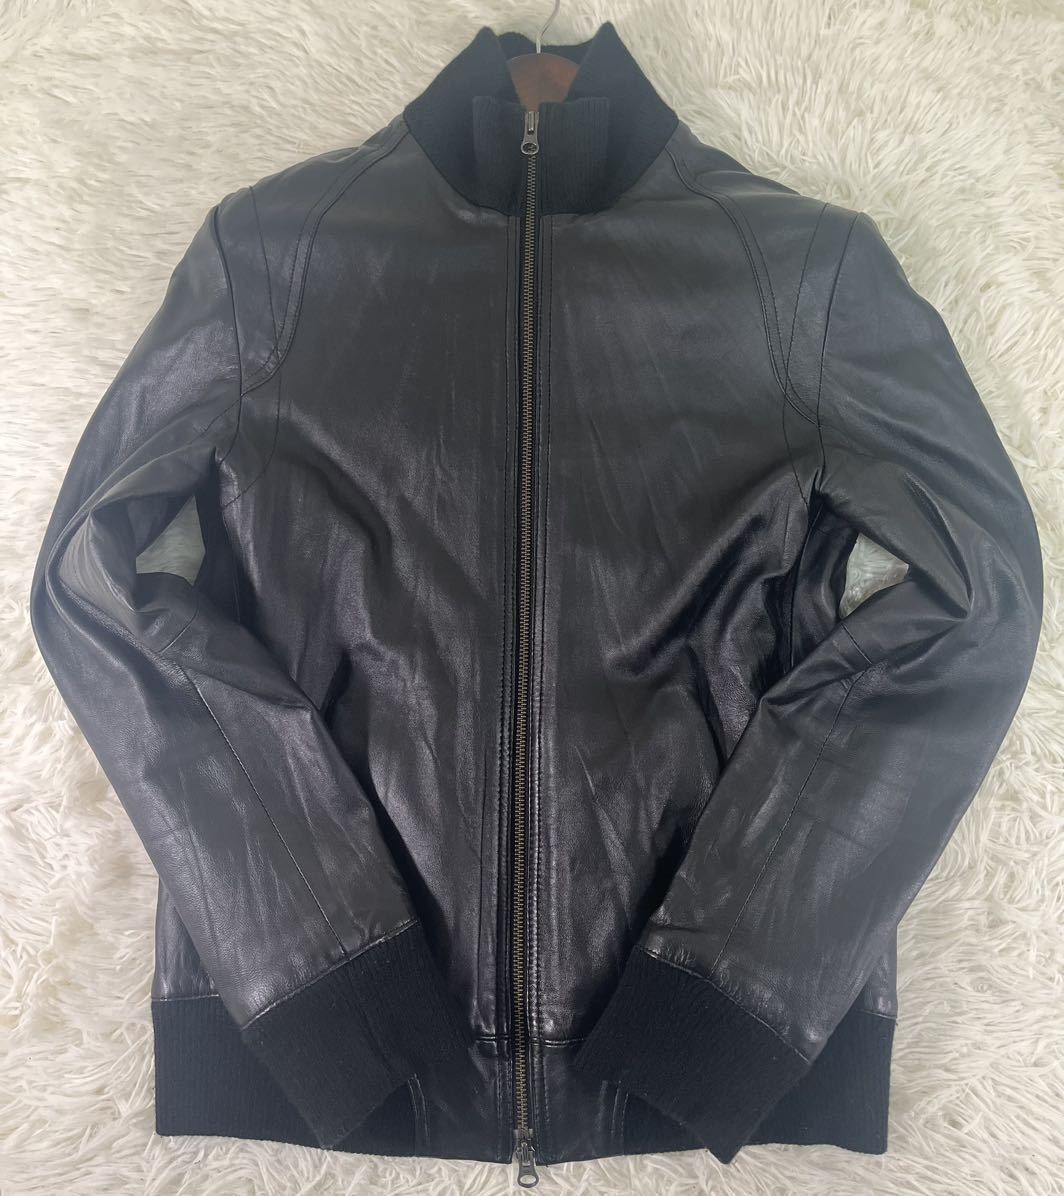  beautiful goods S rank And A And A ram leather single rider's jacket leather jacket blouson sheep leather sheepskin black black 42